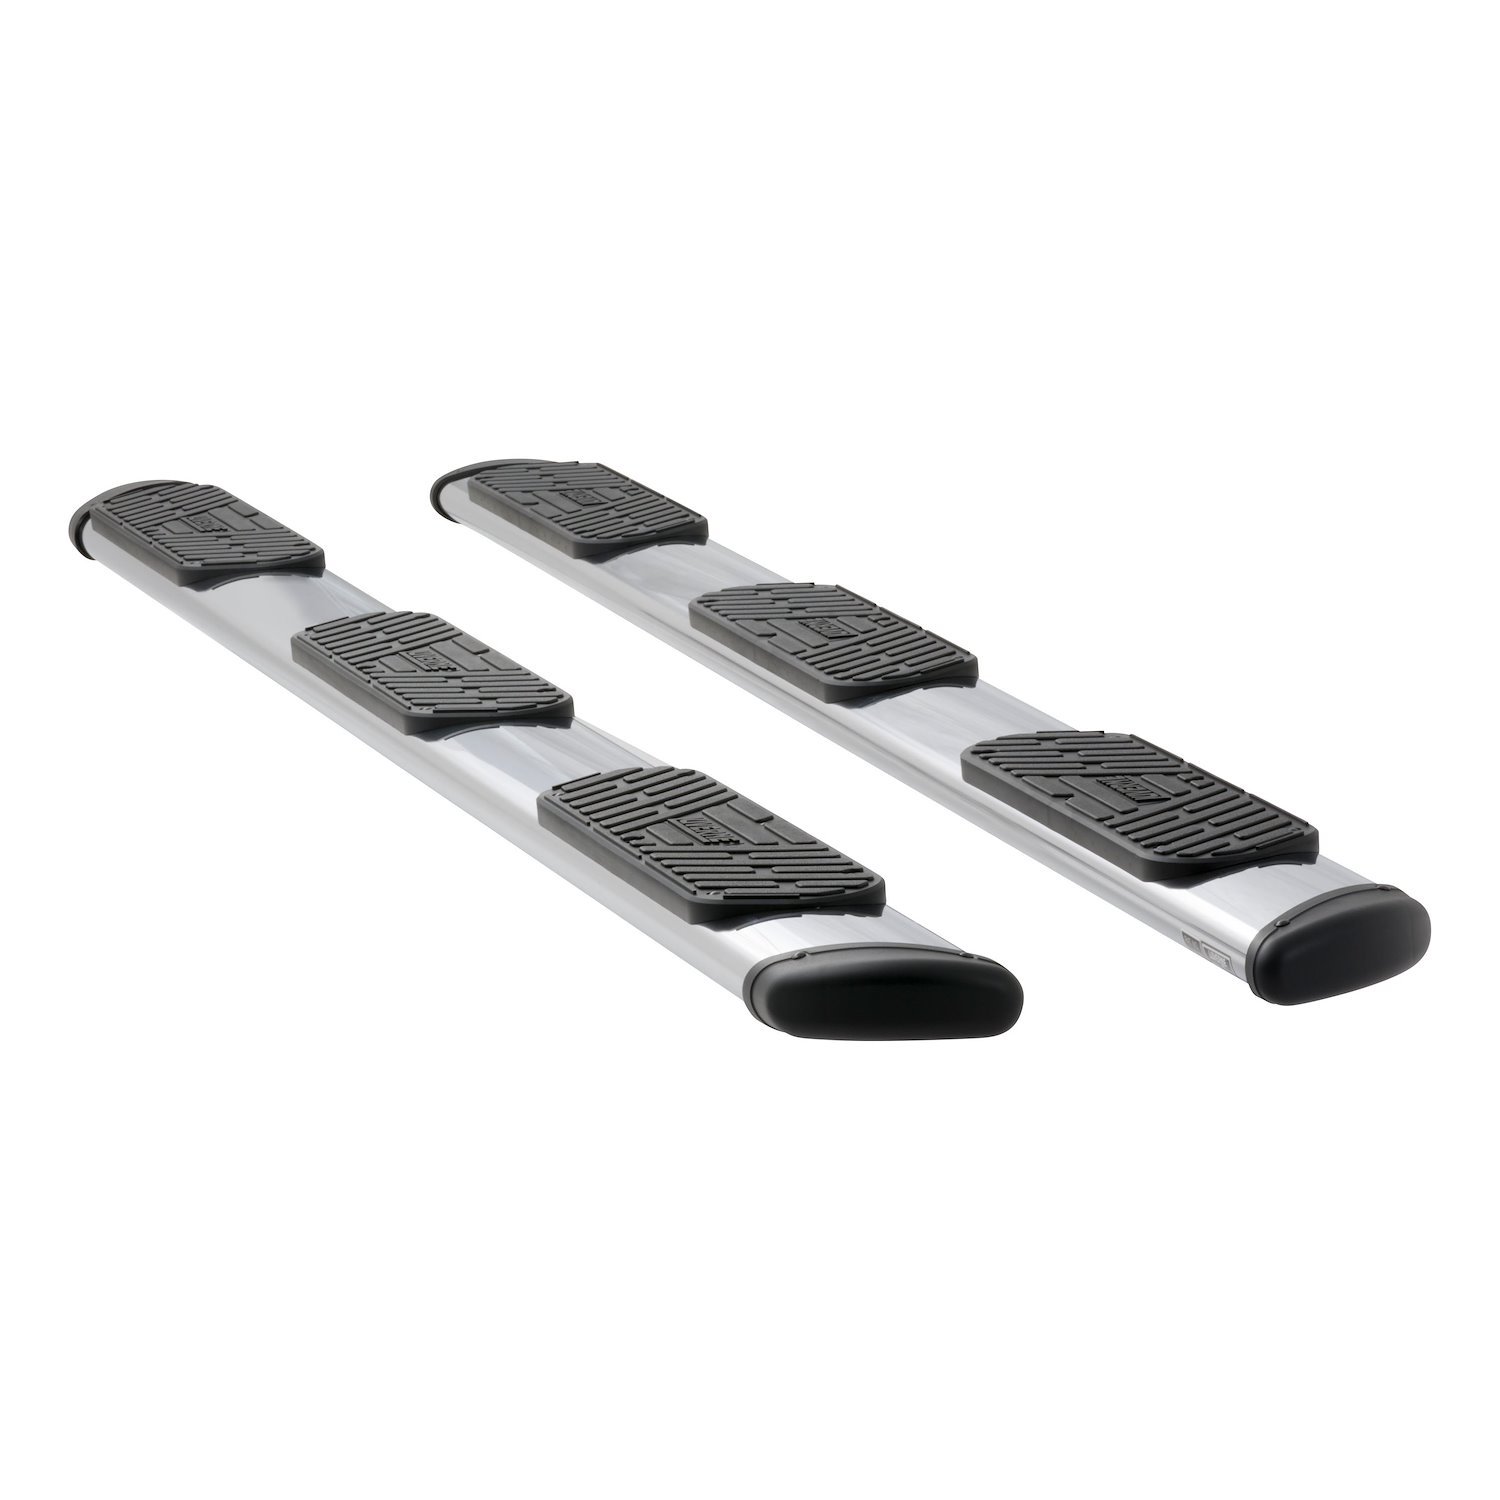 477125-400829 Regal 7 Polished Stainless 125 in. Oval W2W Steps Fits Select Ford F-250, F-350, F-450